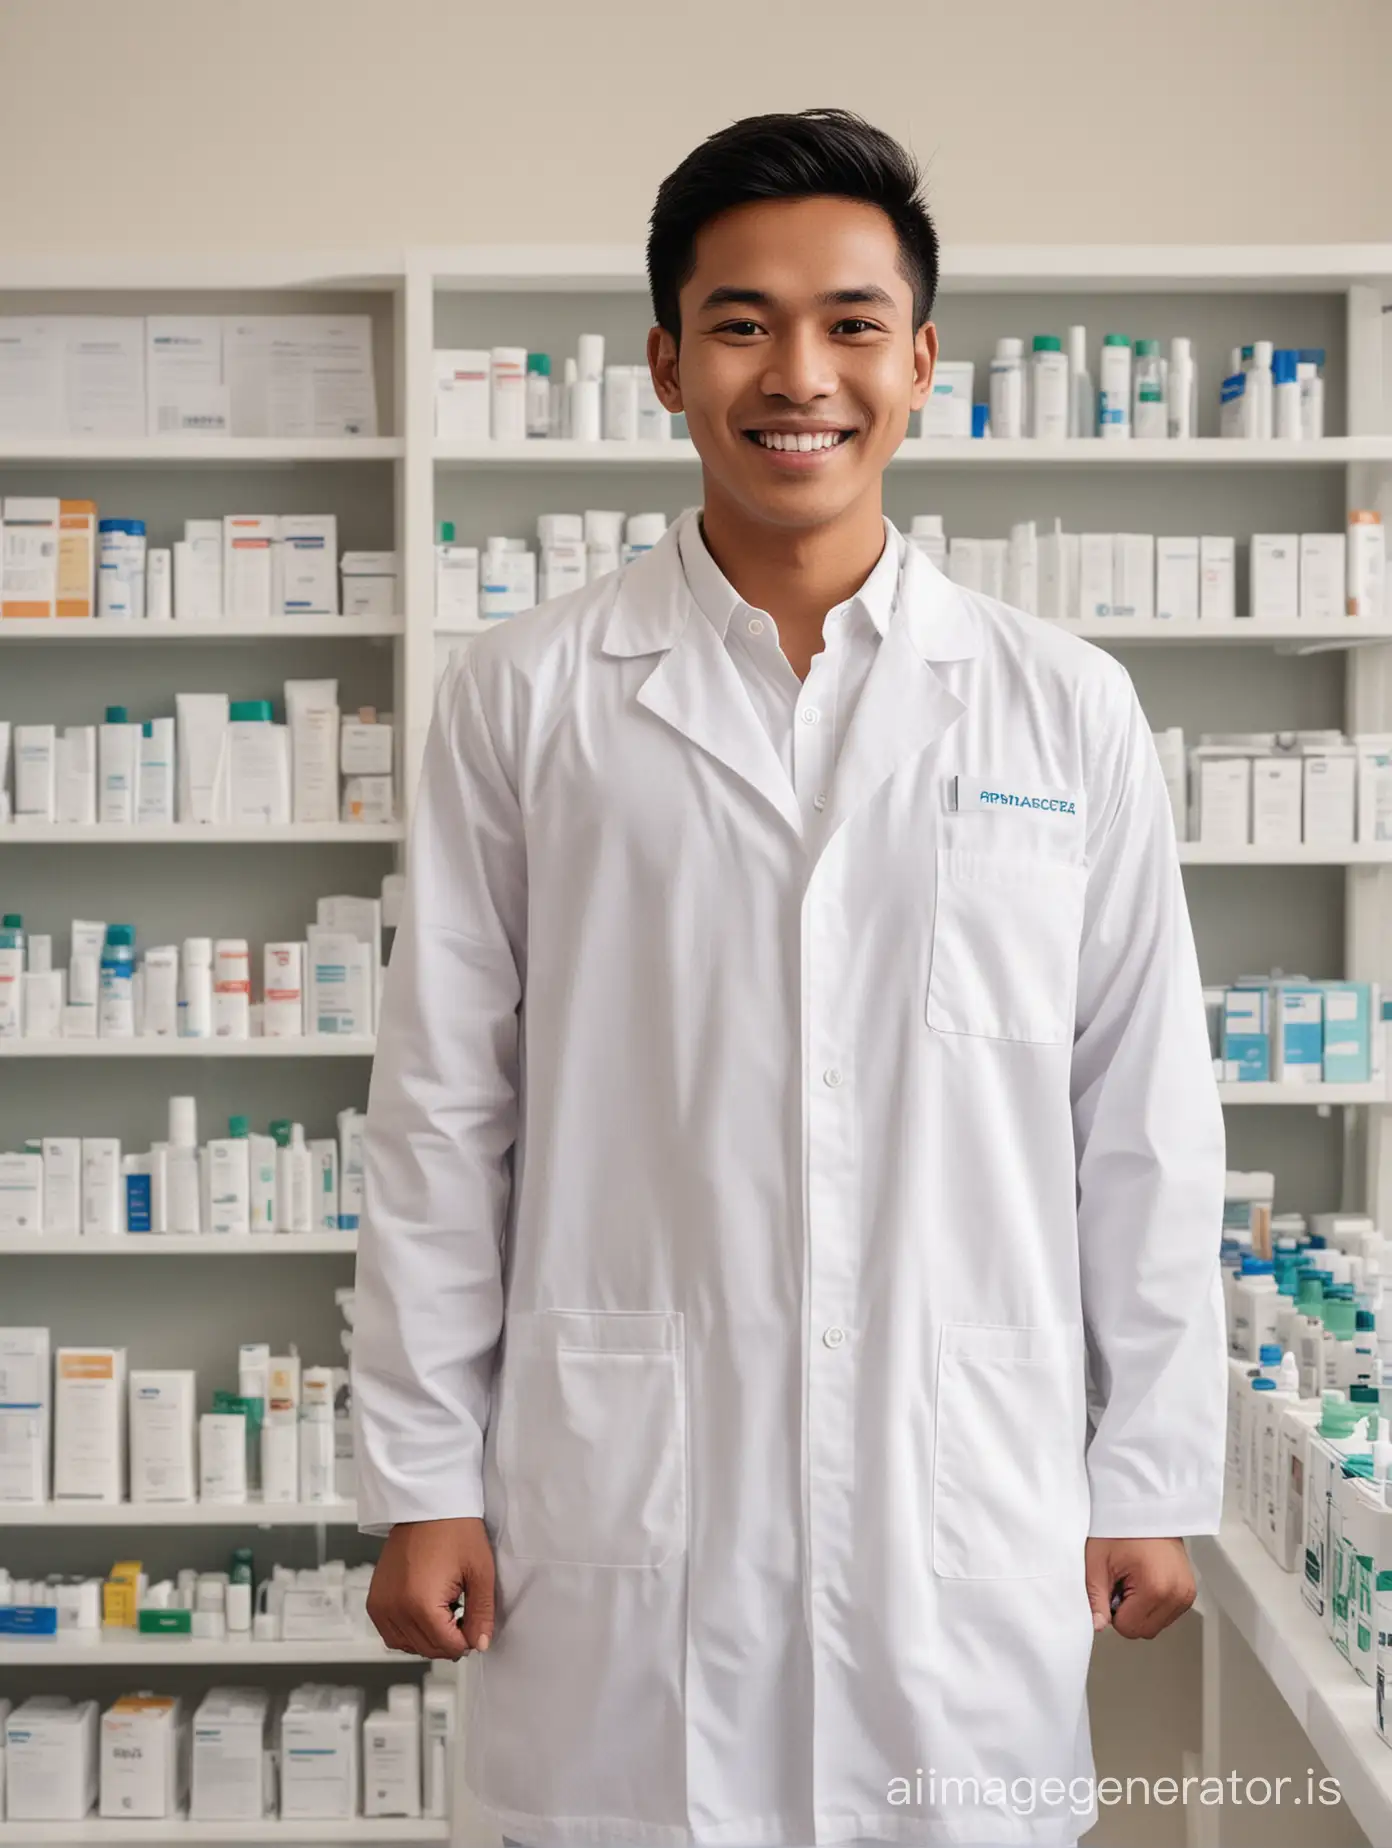 25 years old Indonesian man stand at pharmacy with smiling face and wear a white pharmacist shirt